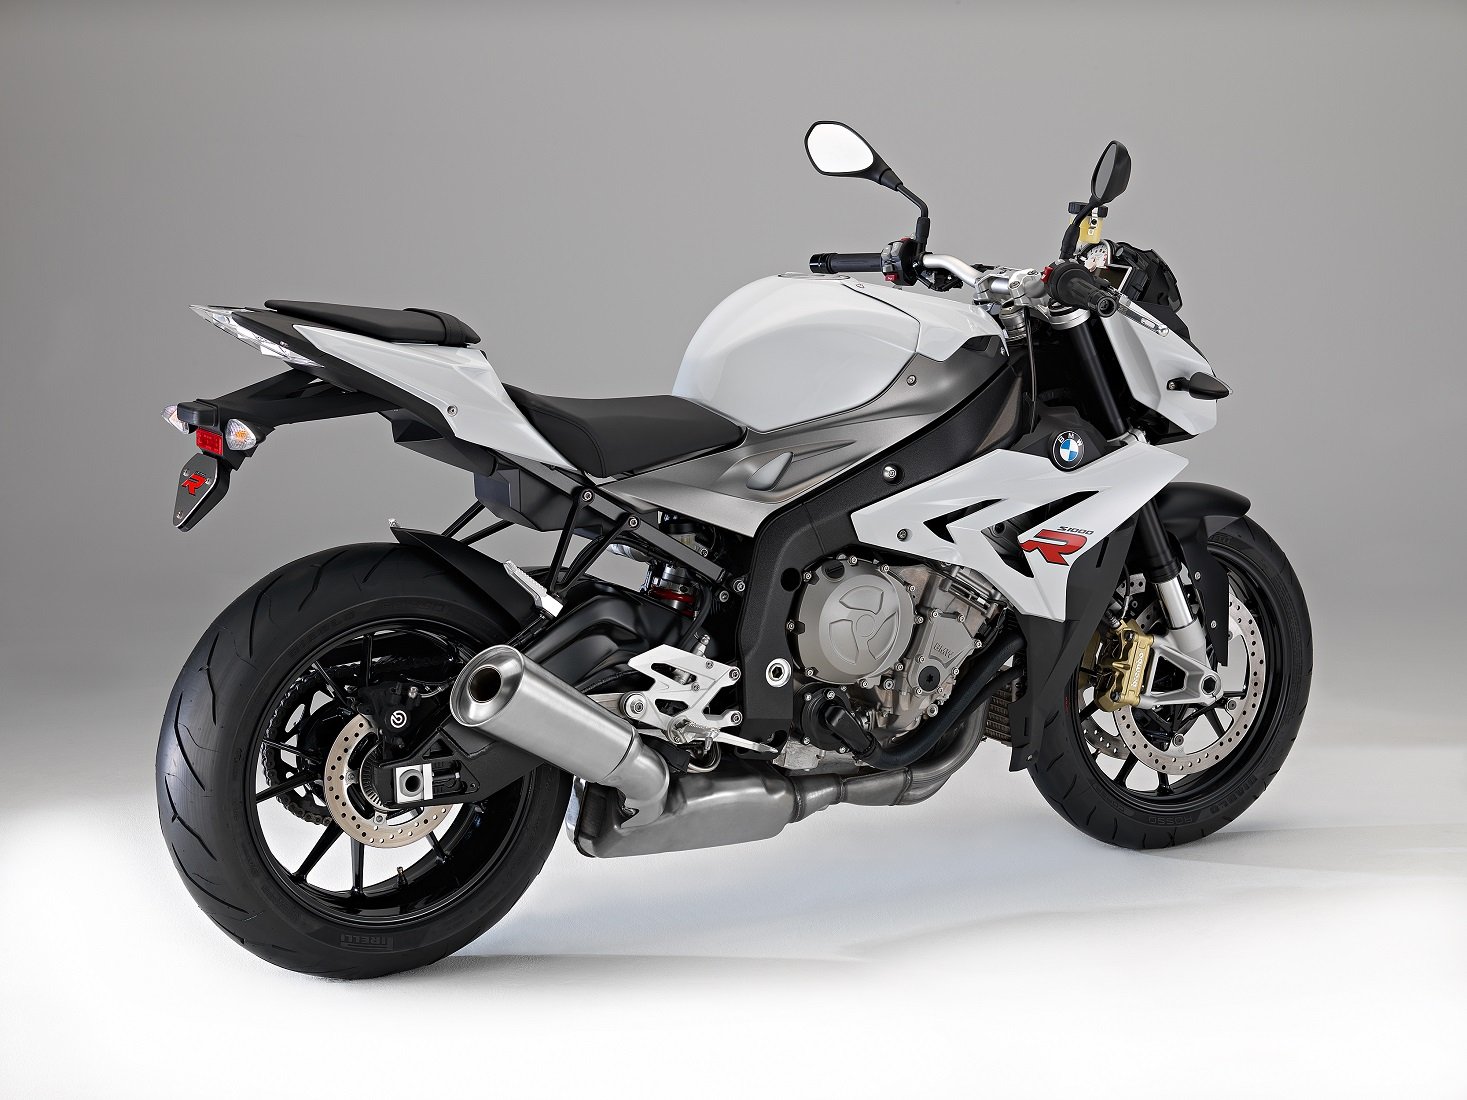 bmw, S 1000 r, Motorcycles, 2013 Wallpaper